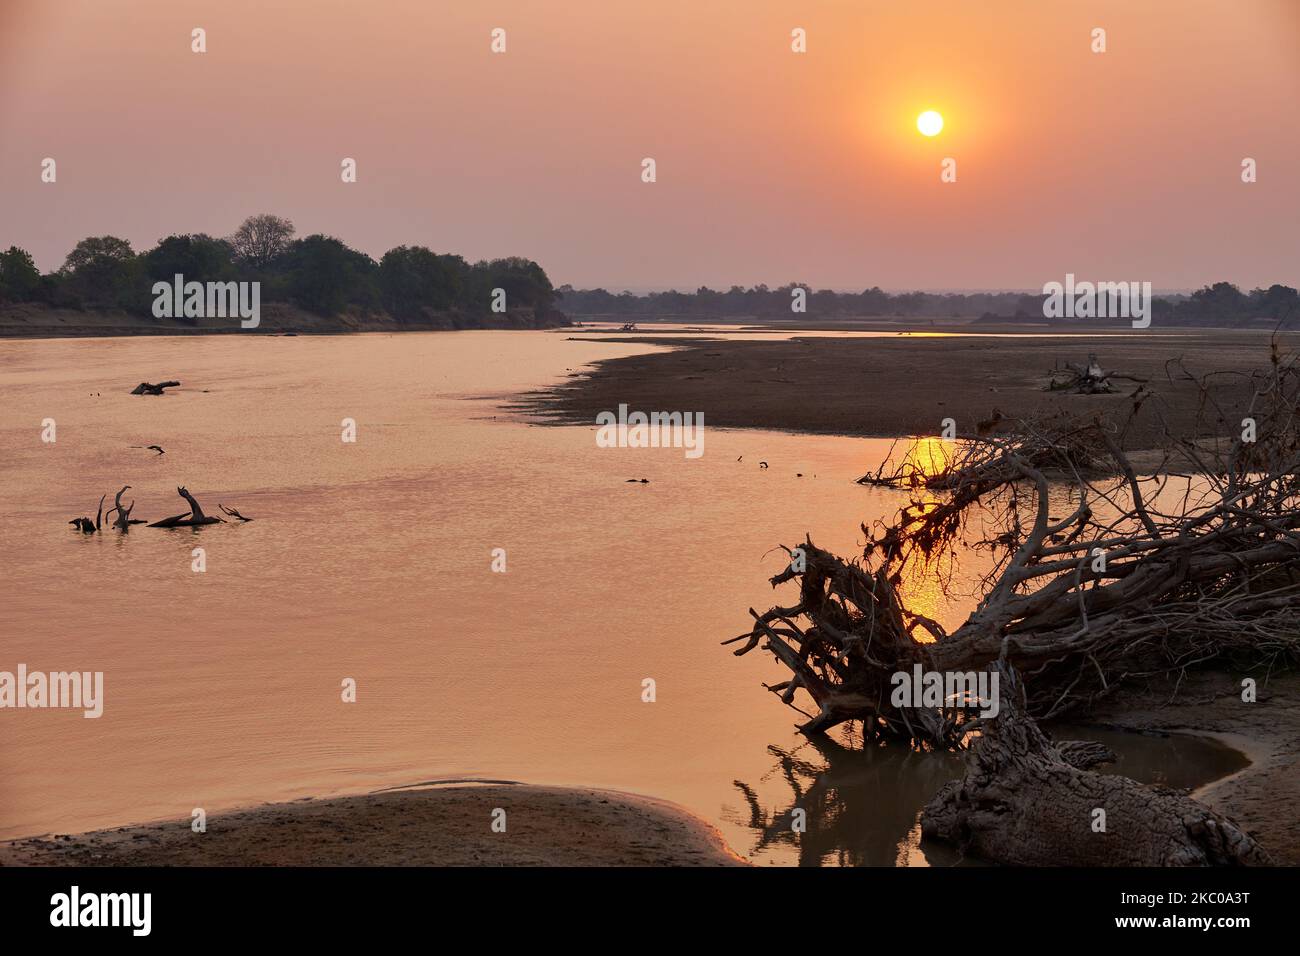 Sunset at South Luangwa river, South Luangwa National Park, Zambia, Africa Stock Photo